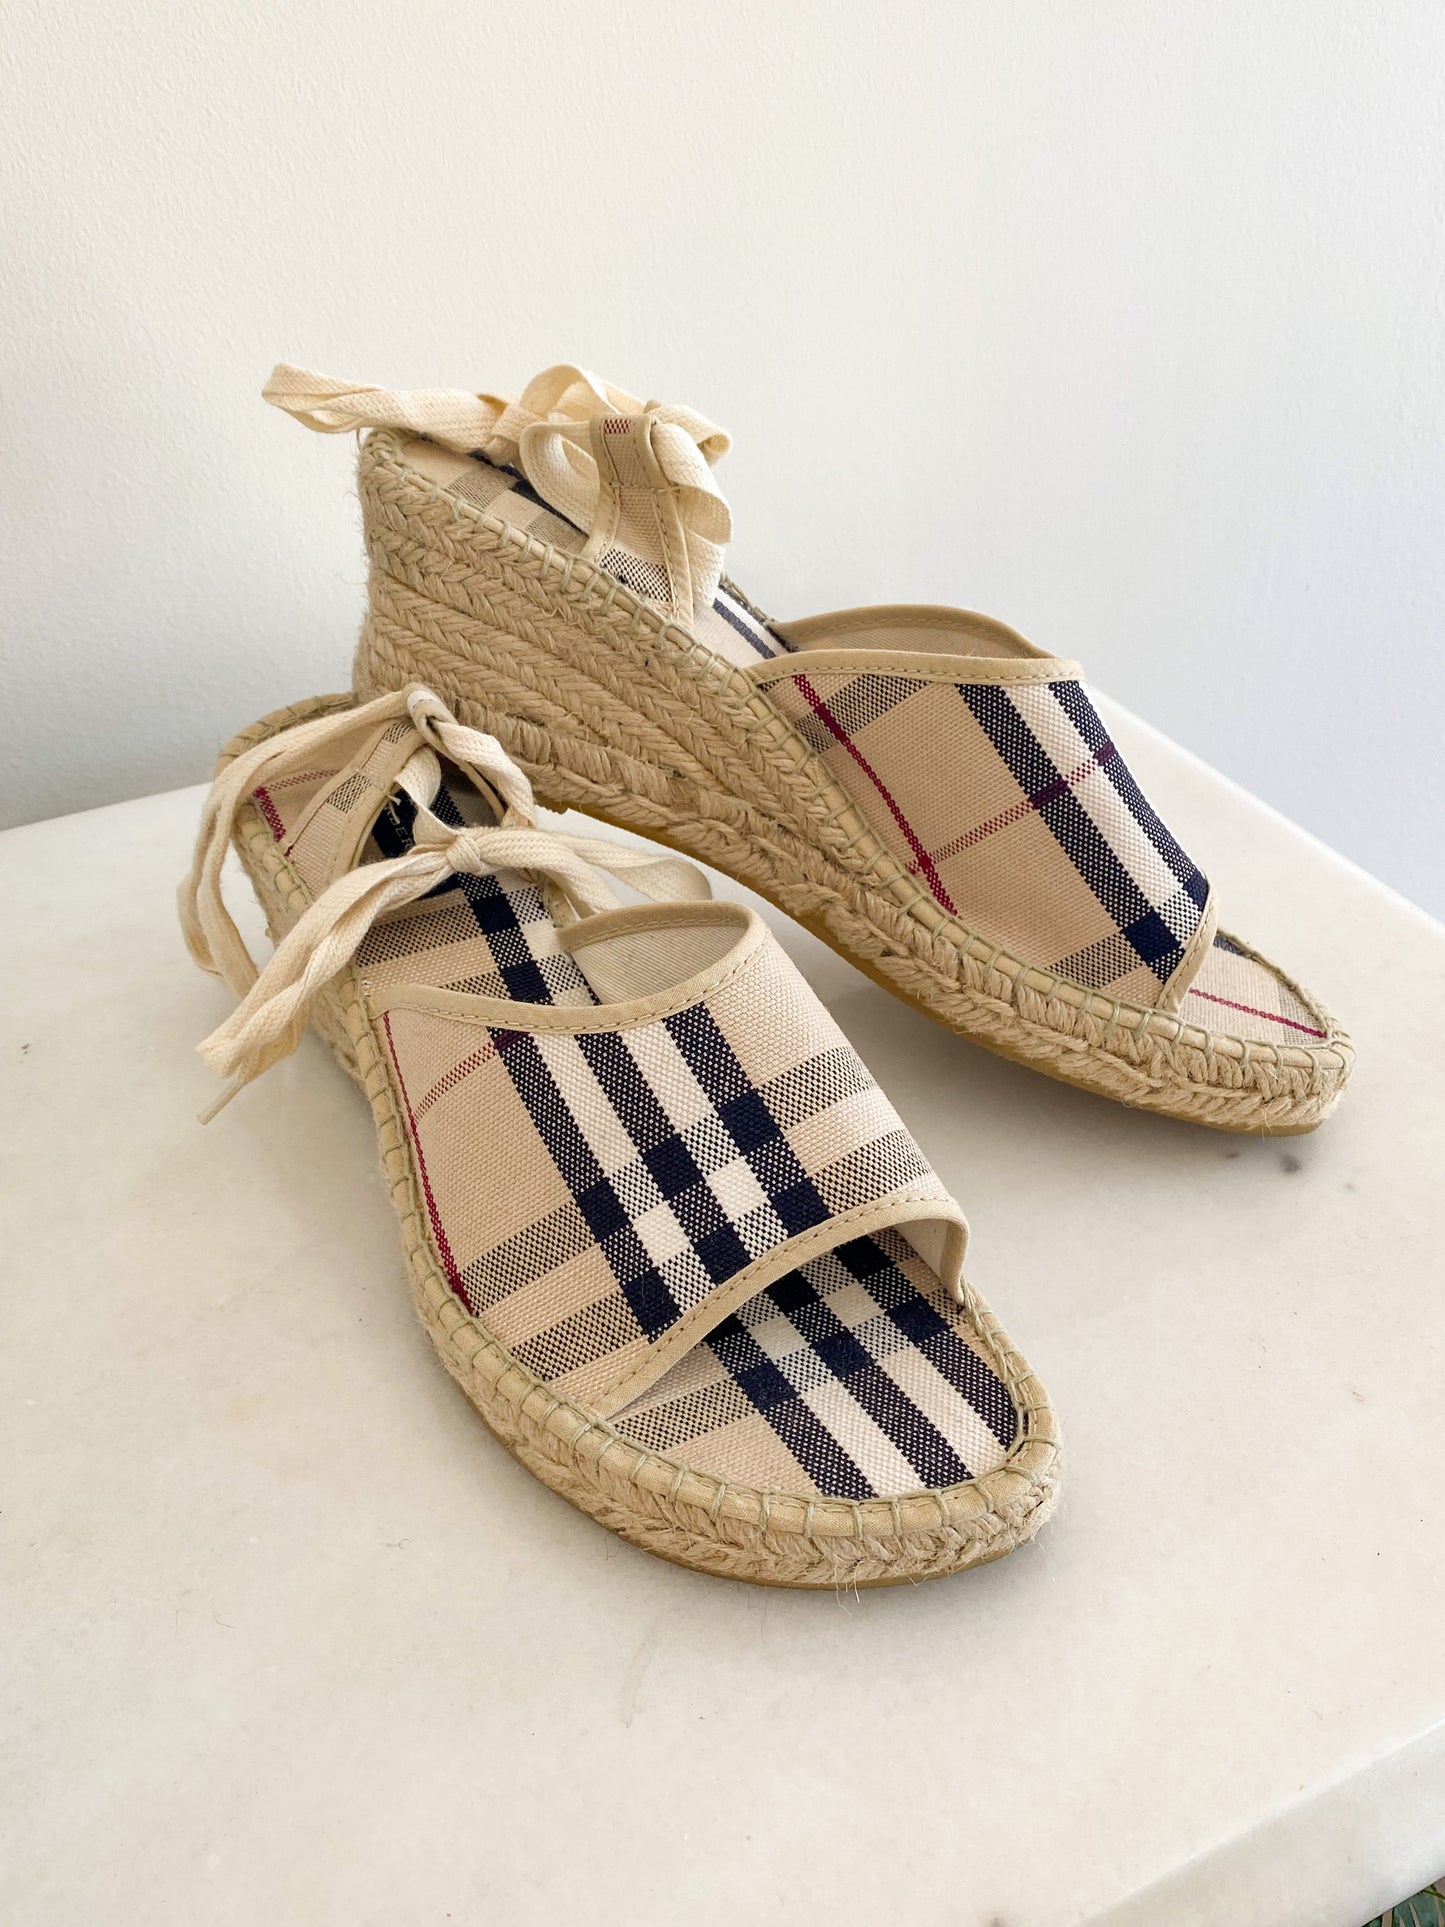 Burberry Check Wedge Espadrilles - NWOT